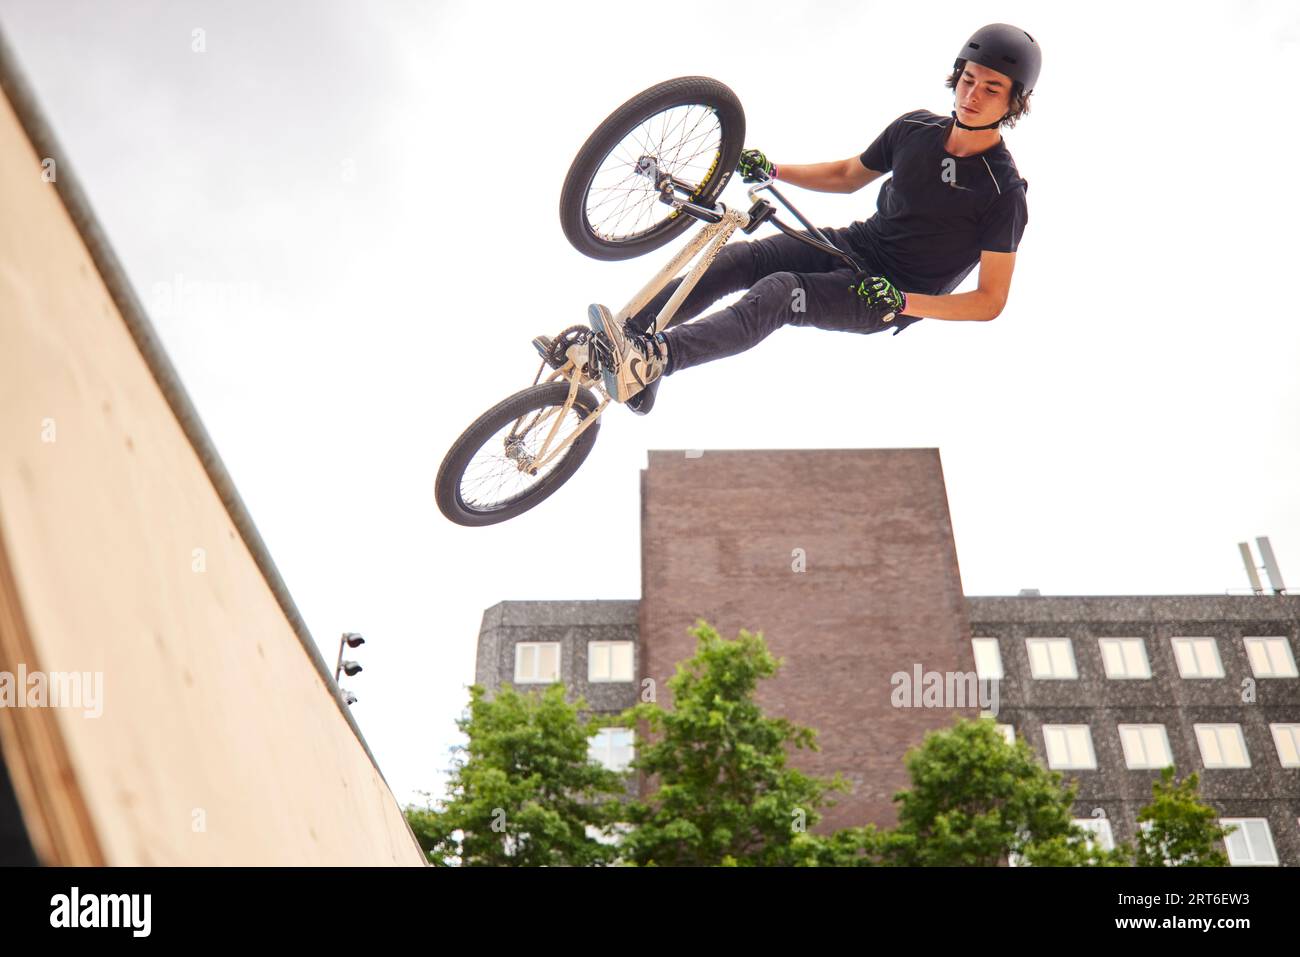 Stockport Move 2023 Stockport town centre BMX tricks on a ramp Stock Photo